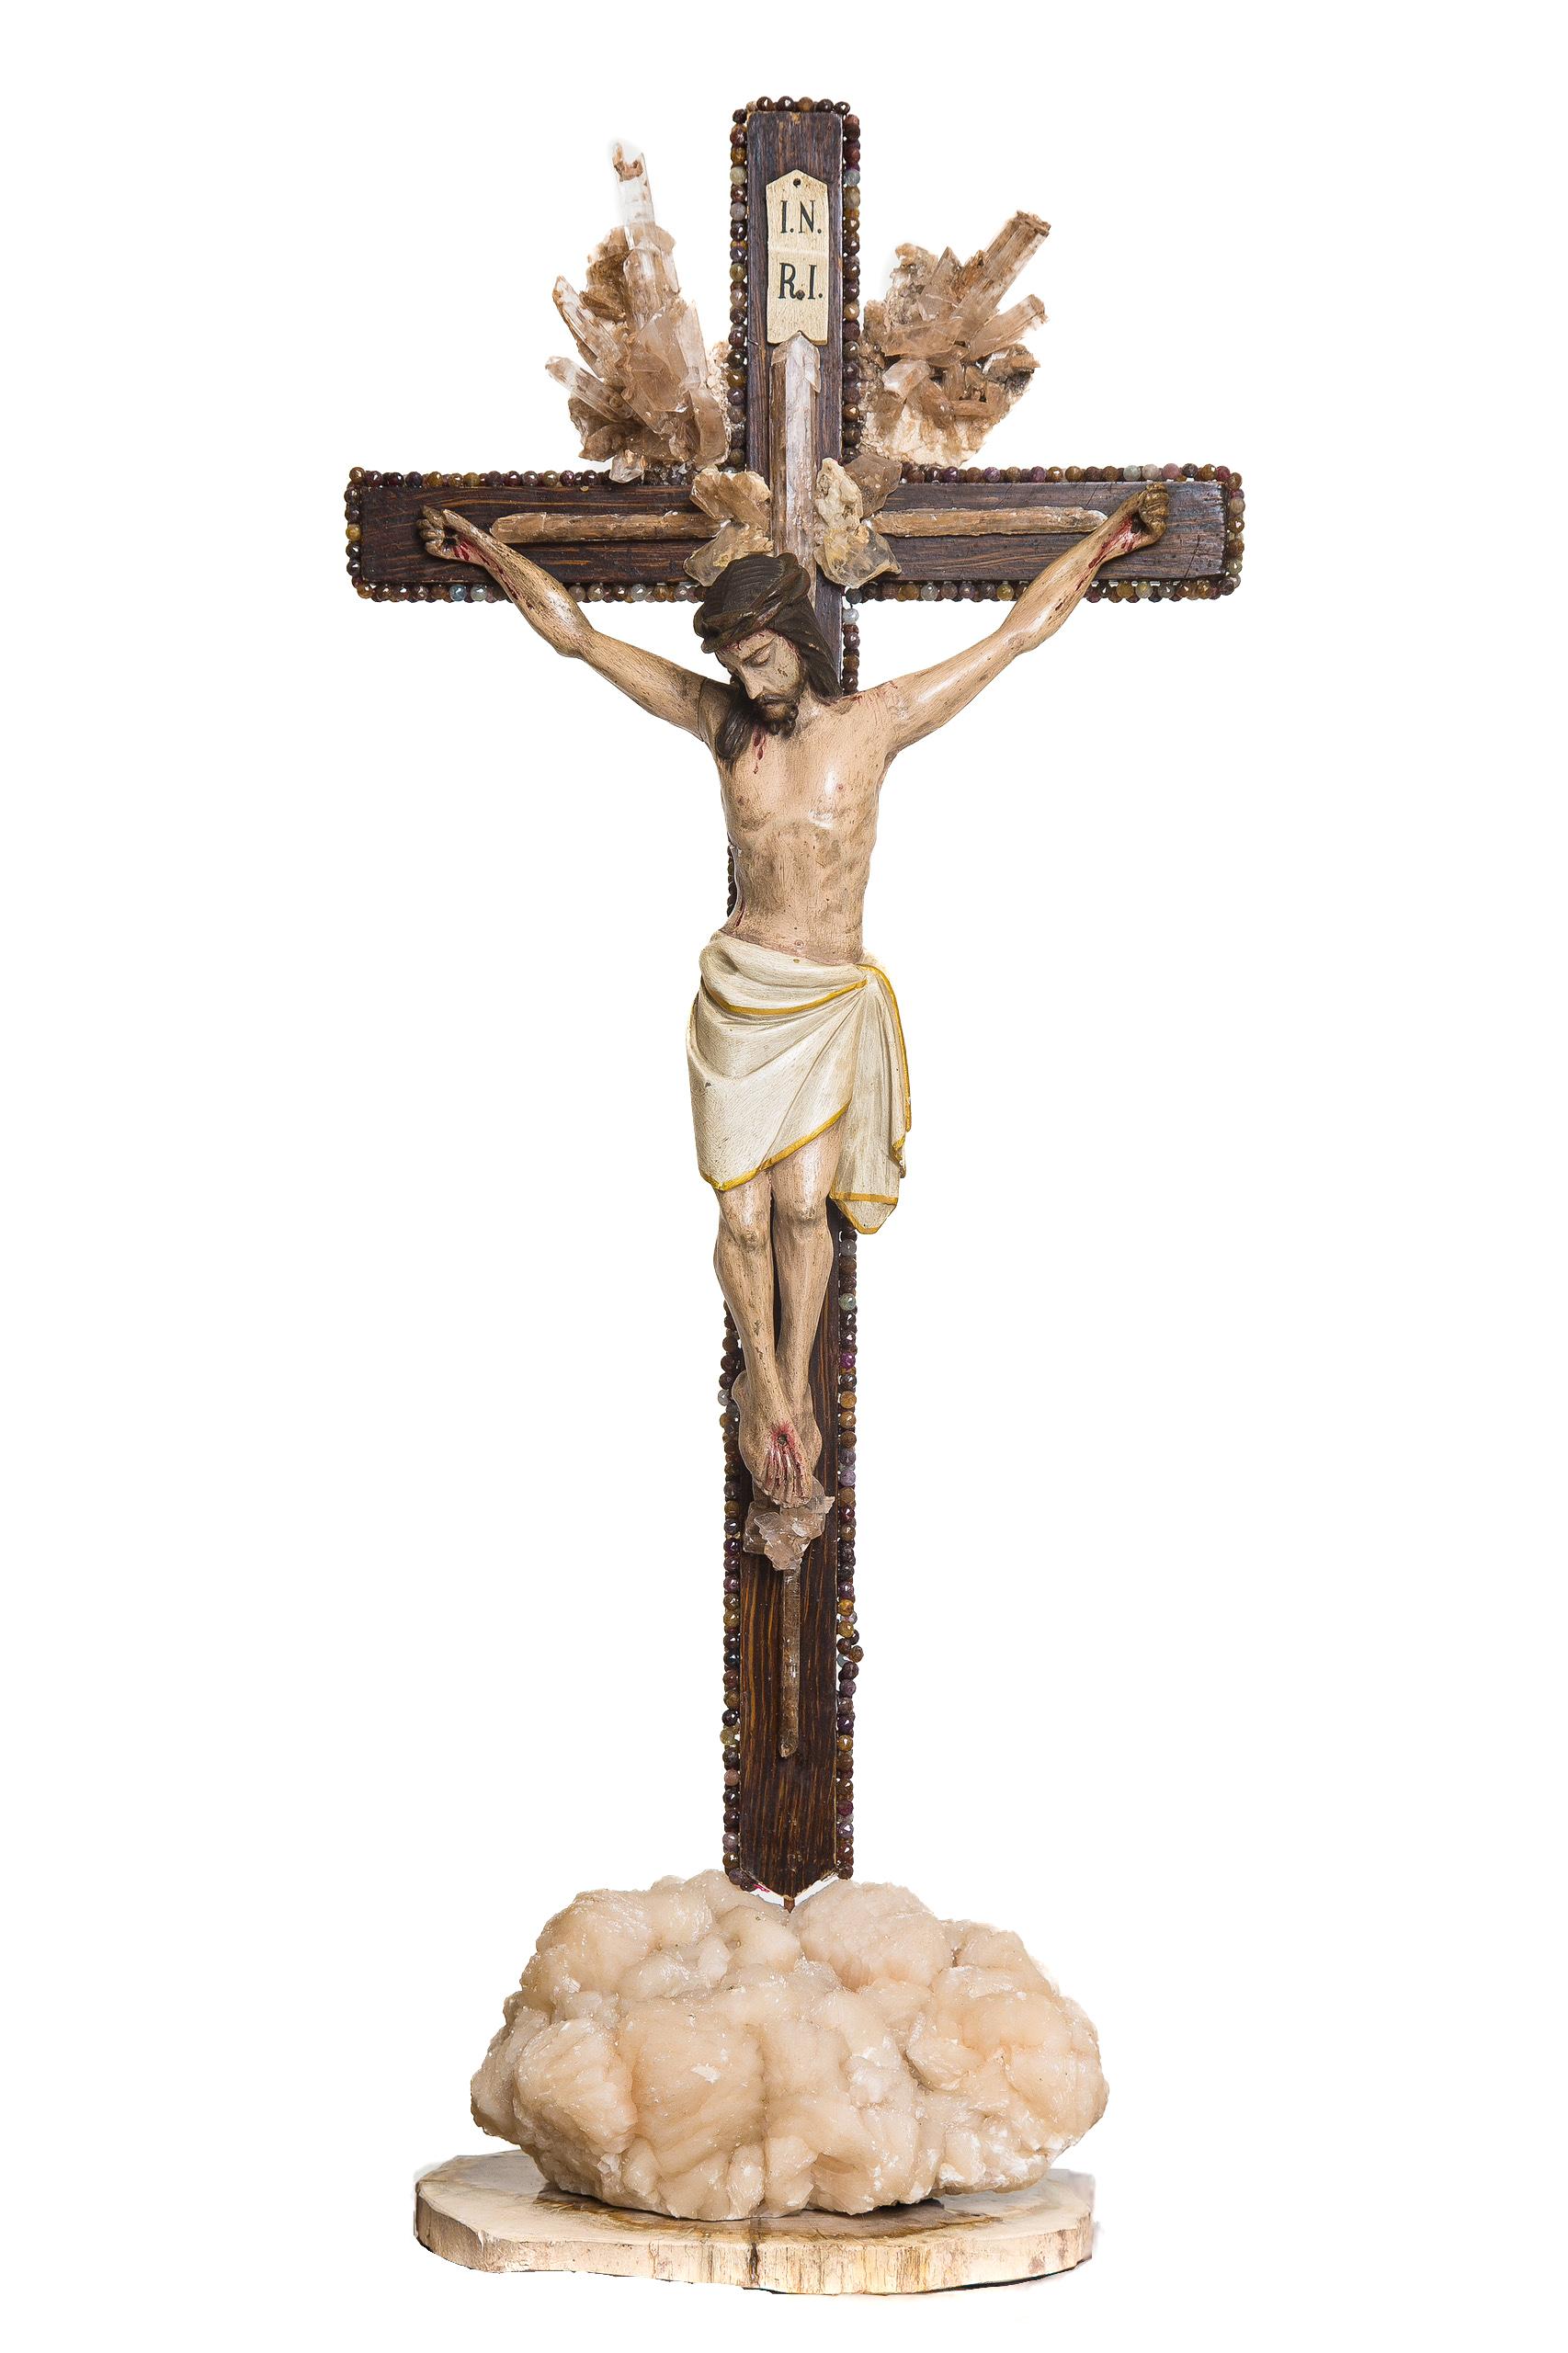 Sculptural 18th century Italian crucifix with selenite in matrix and adorned with gem beading around the cross. The selenite in matrix creates the sunrays around the crucifix. The piece is mounted on apophyllite and petrified wood.

The piece is put